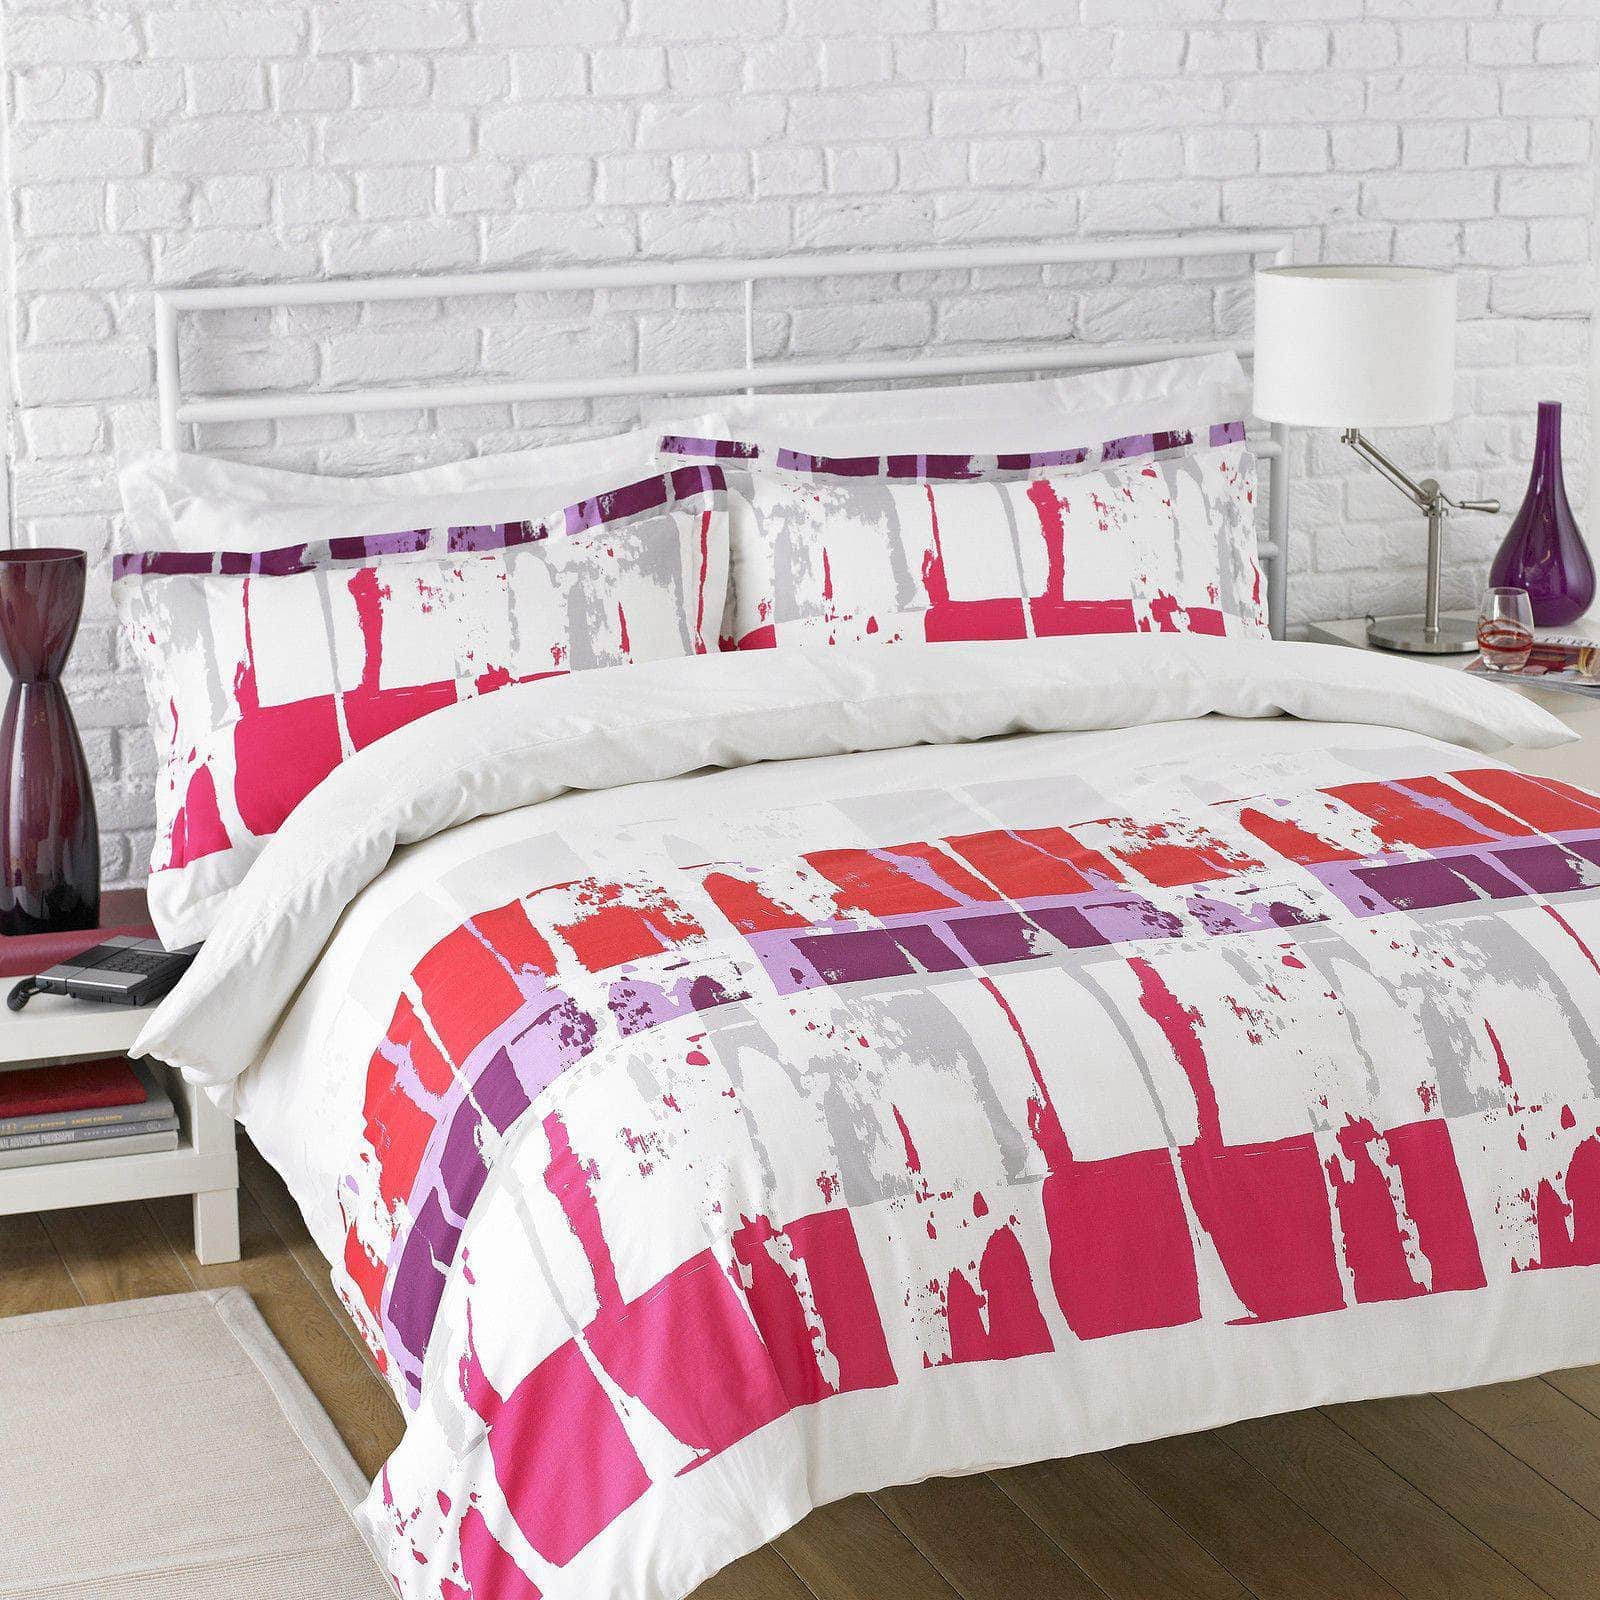 marble effect bedding